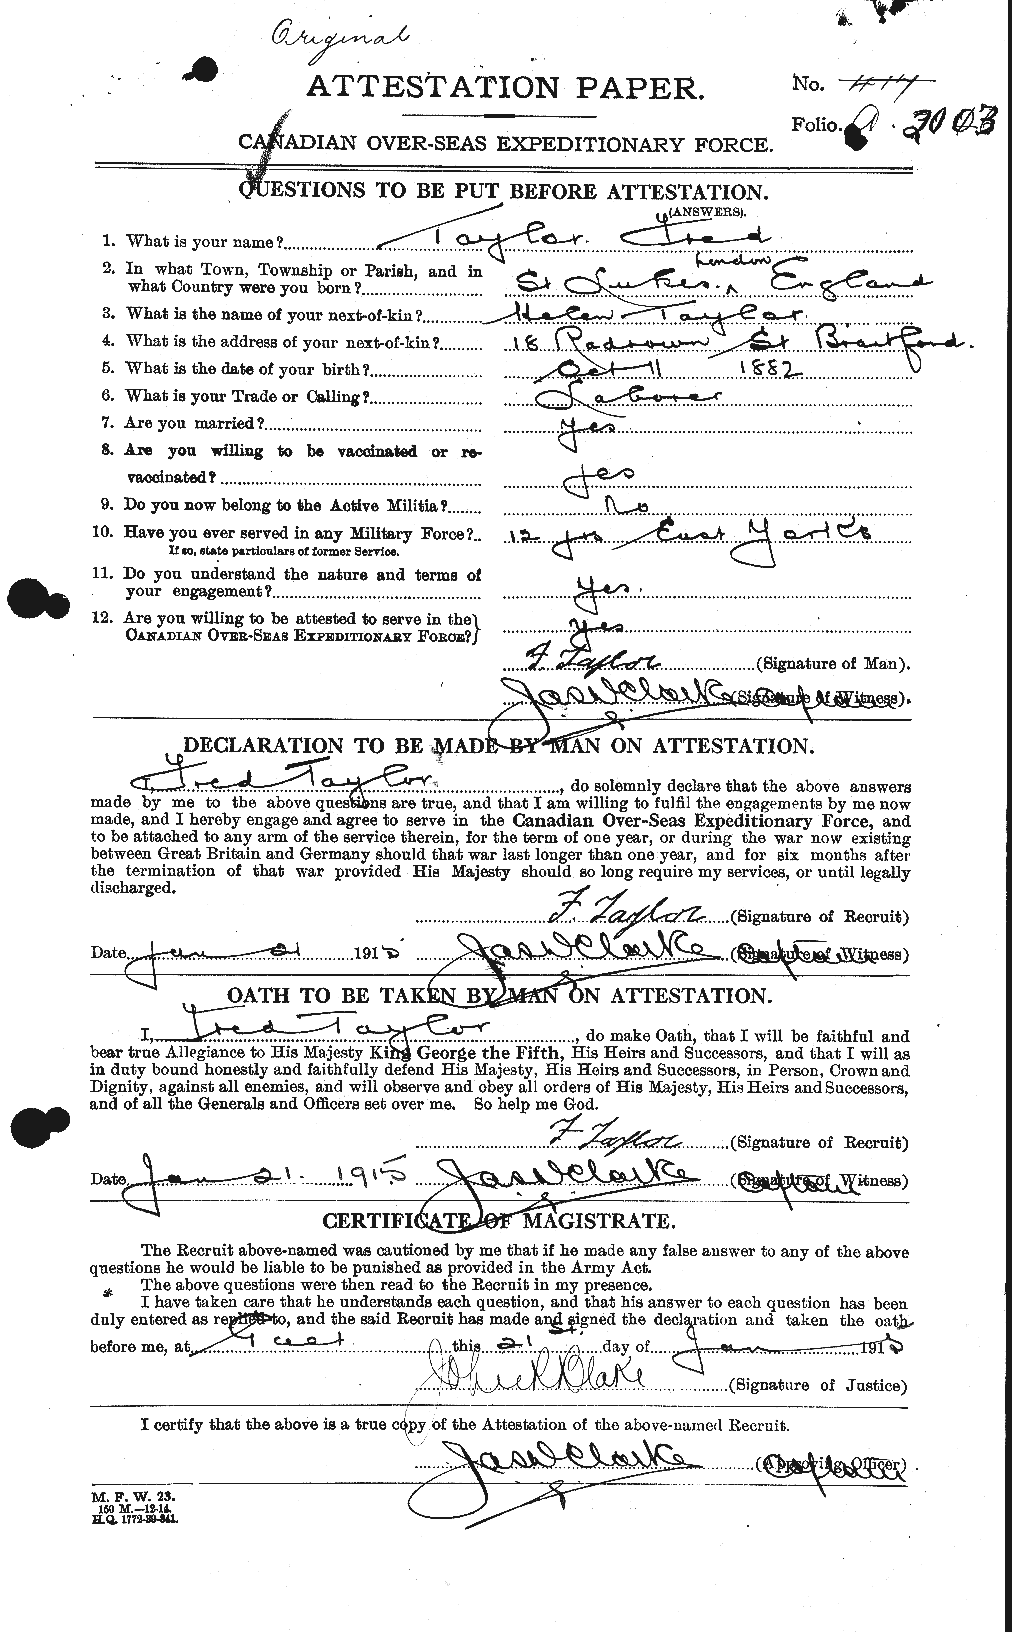 Personnel Records of the First World War - CEF 625741a